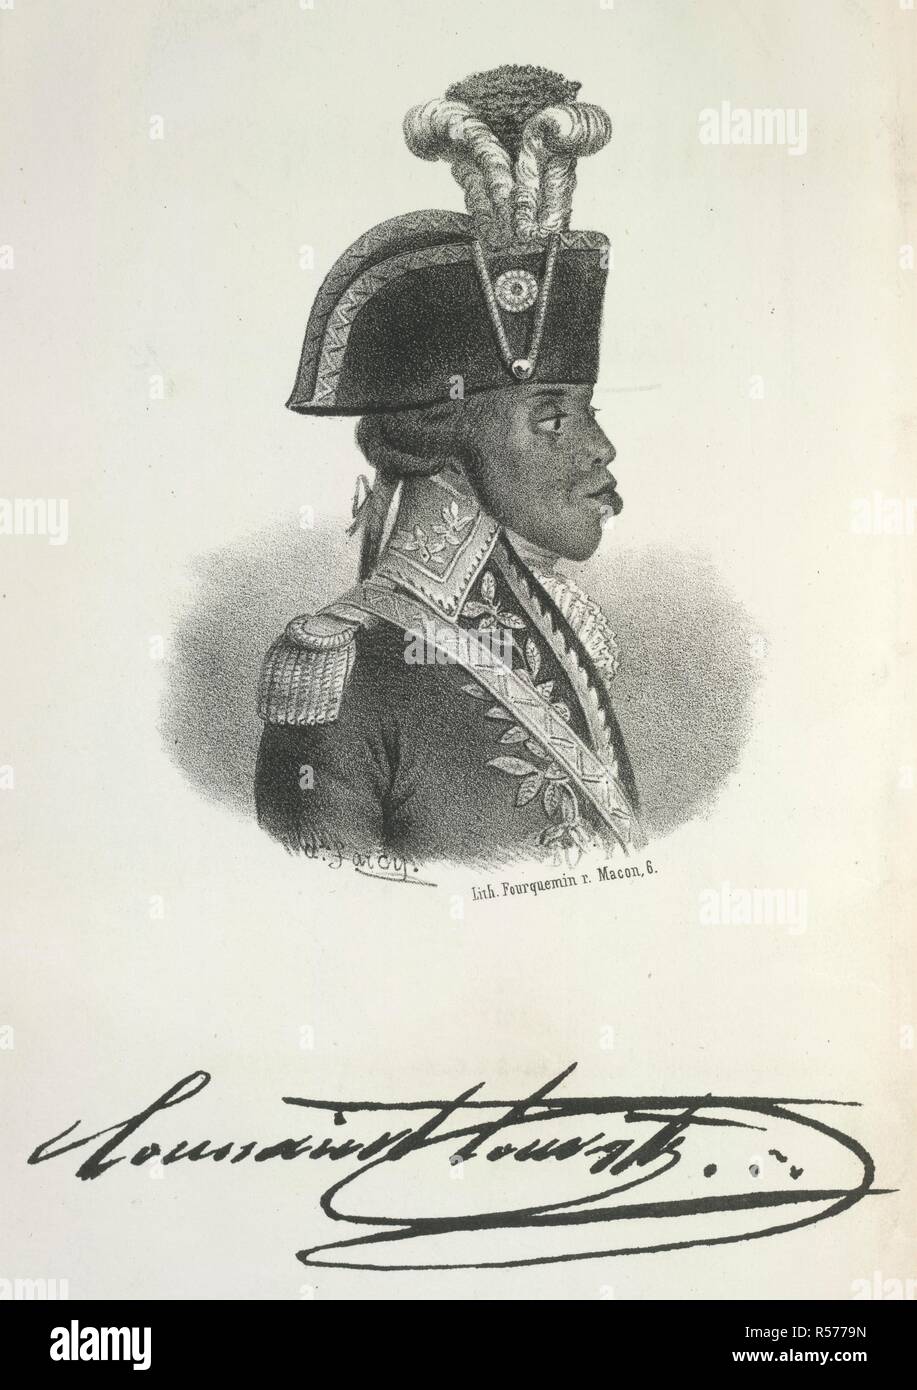 Toussaint Louverture. (1746-1803). Haitian revolutionary leader. Vie de Toussaint-L'Ouverture. Paris, 1850. Toussaint Louverture (1746-1803). Haitian revolutionary leader. Born a slave, he became a general in the French army but after driving out the British and Spanish expeditions, he took control of the island. Napoleon sent an expedition to restore restore control and the re-establishment of slavery. He was treacherously seized from a meeting, imprisoned and died of neglect in prison. Portrait. Source: 10880.e.42, frontispiece. Language: French. Stock Photo